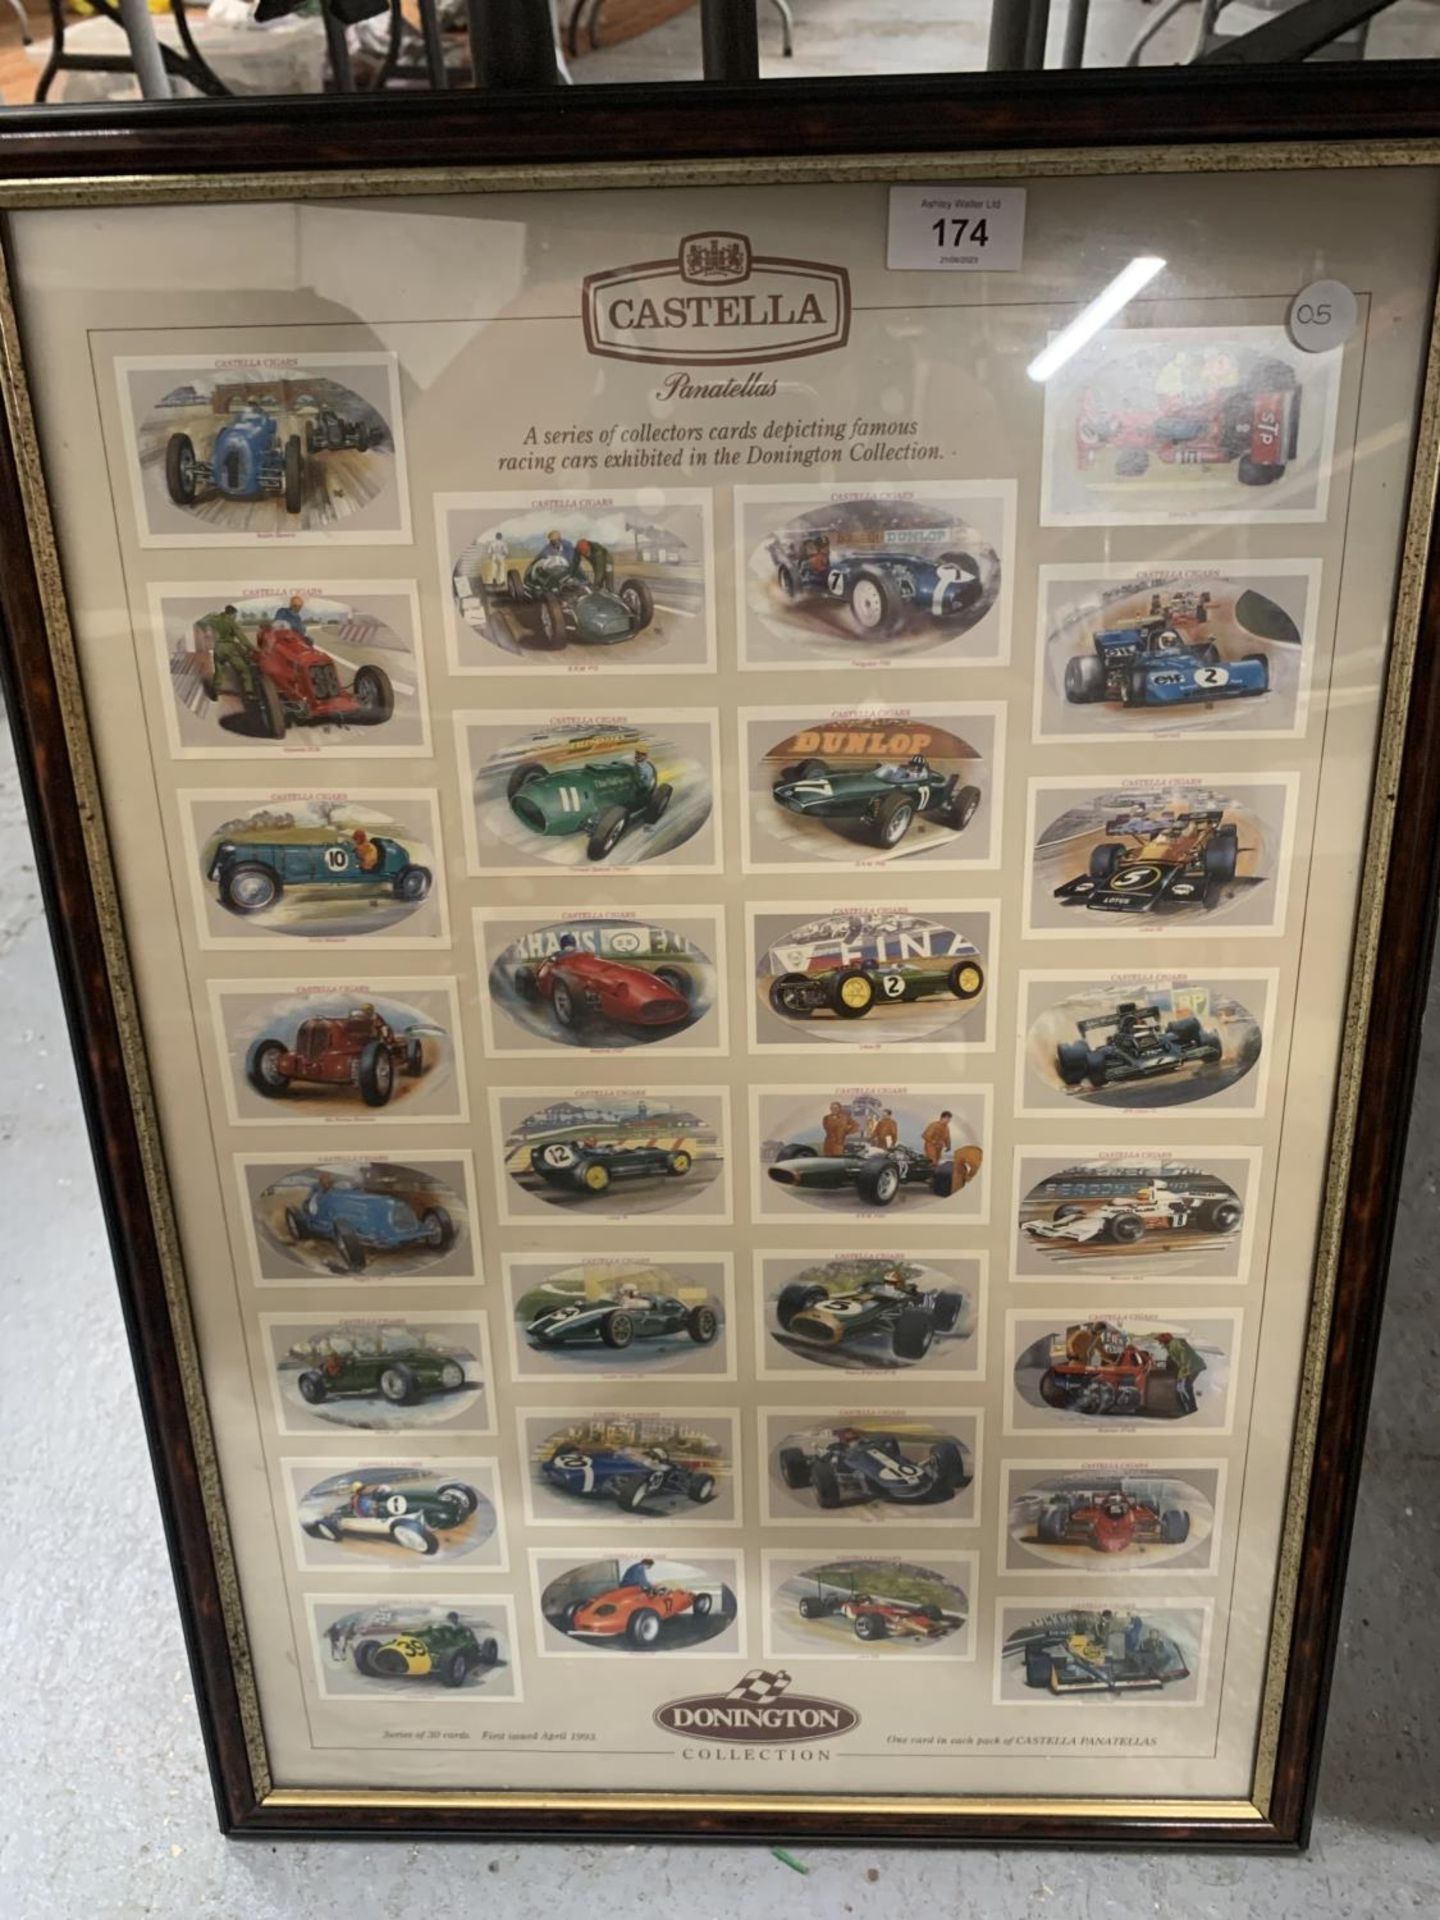 A COLLECTION OF DONNINGTON CASTELLA CIGAR CARDS IN A FRAME